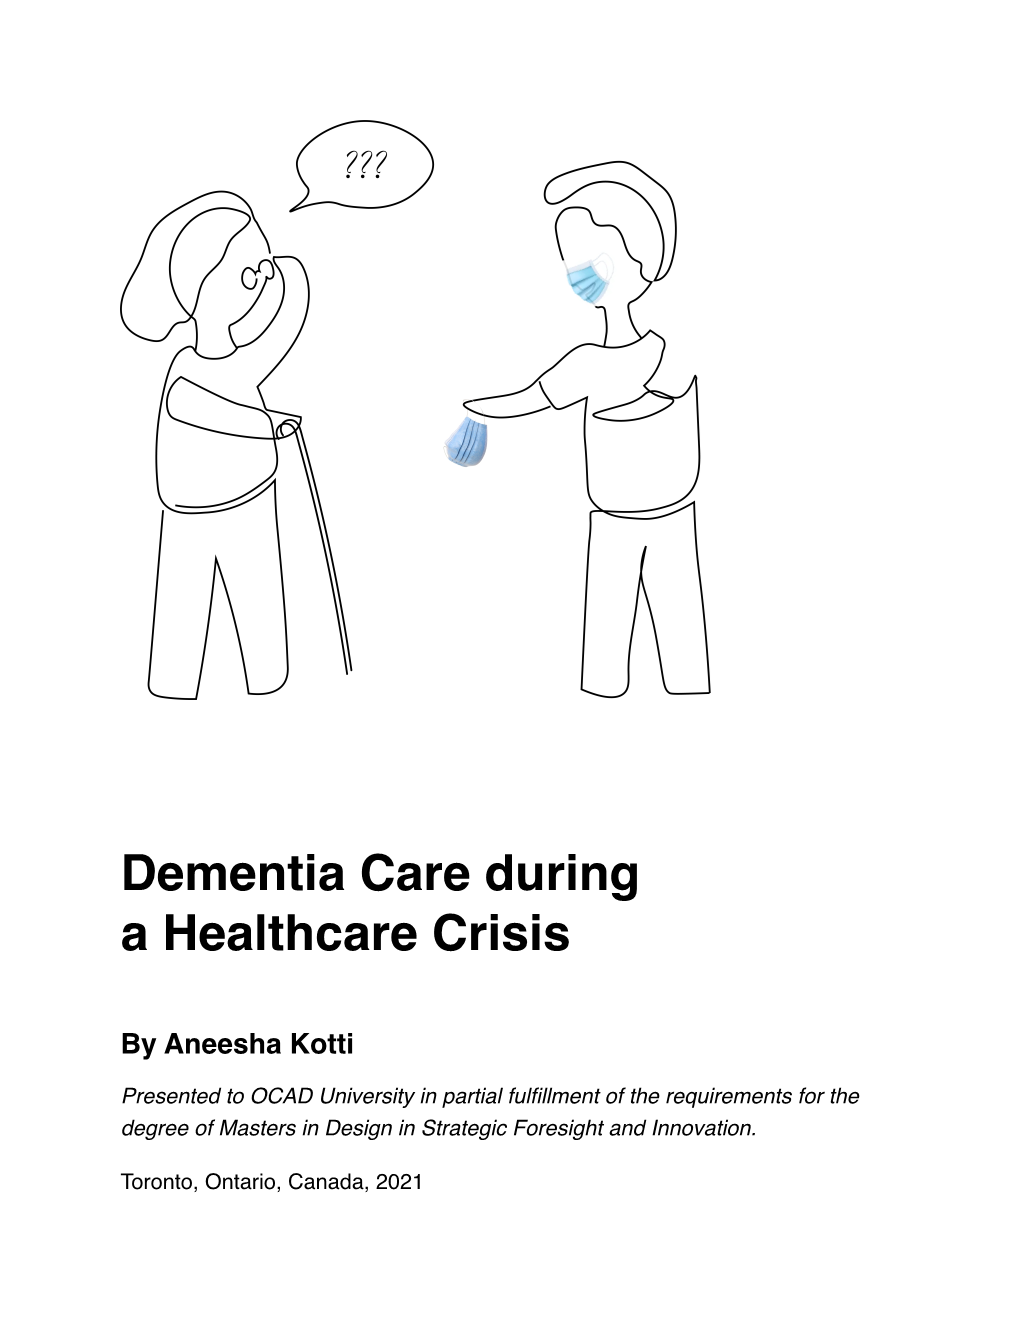 Dementia Care During a Healthcare Crisis